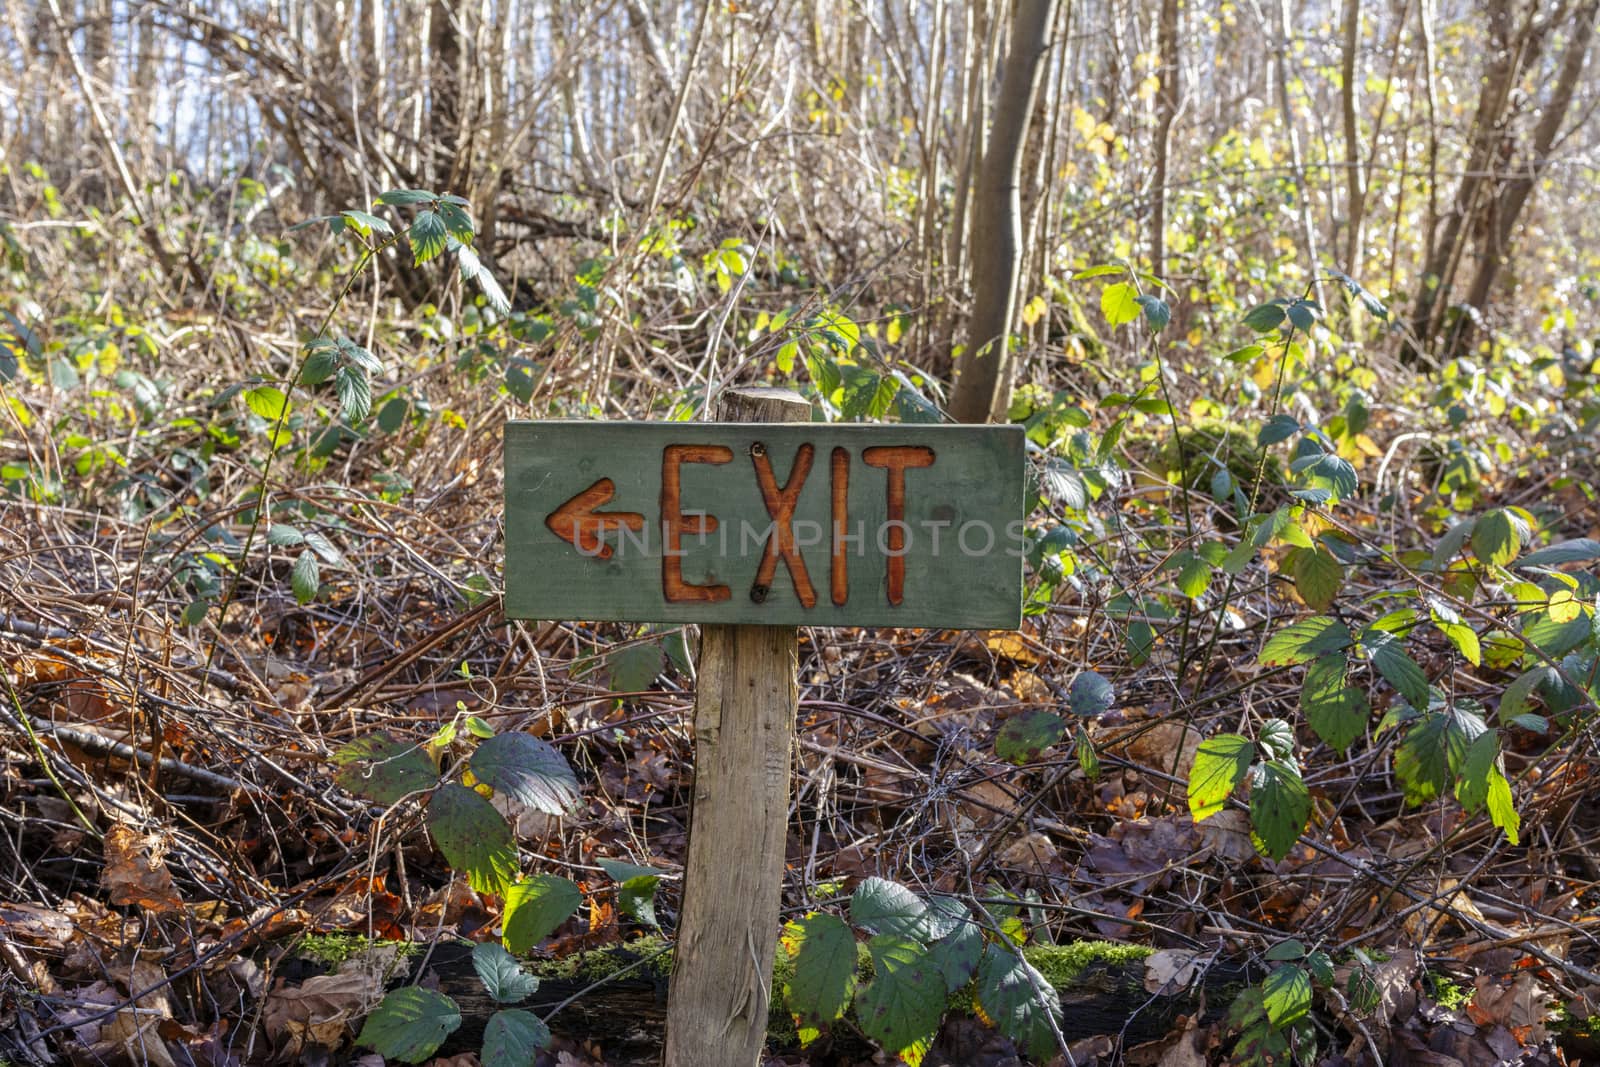 Painted wooden exit sign points left among tangled brambles and undergrowth in woodland